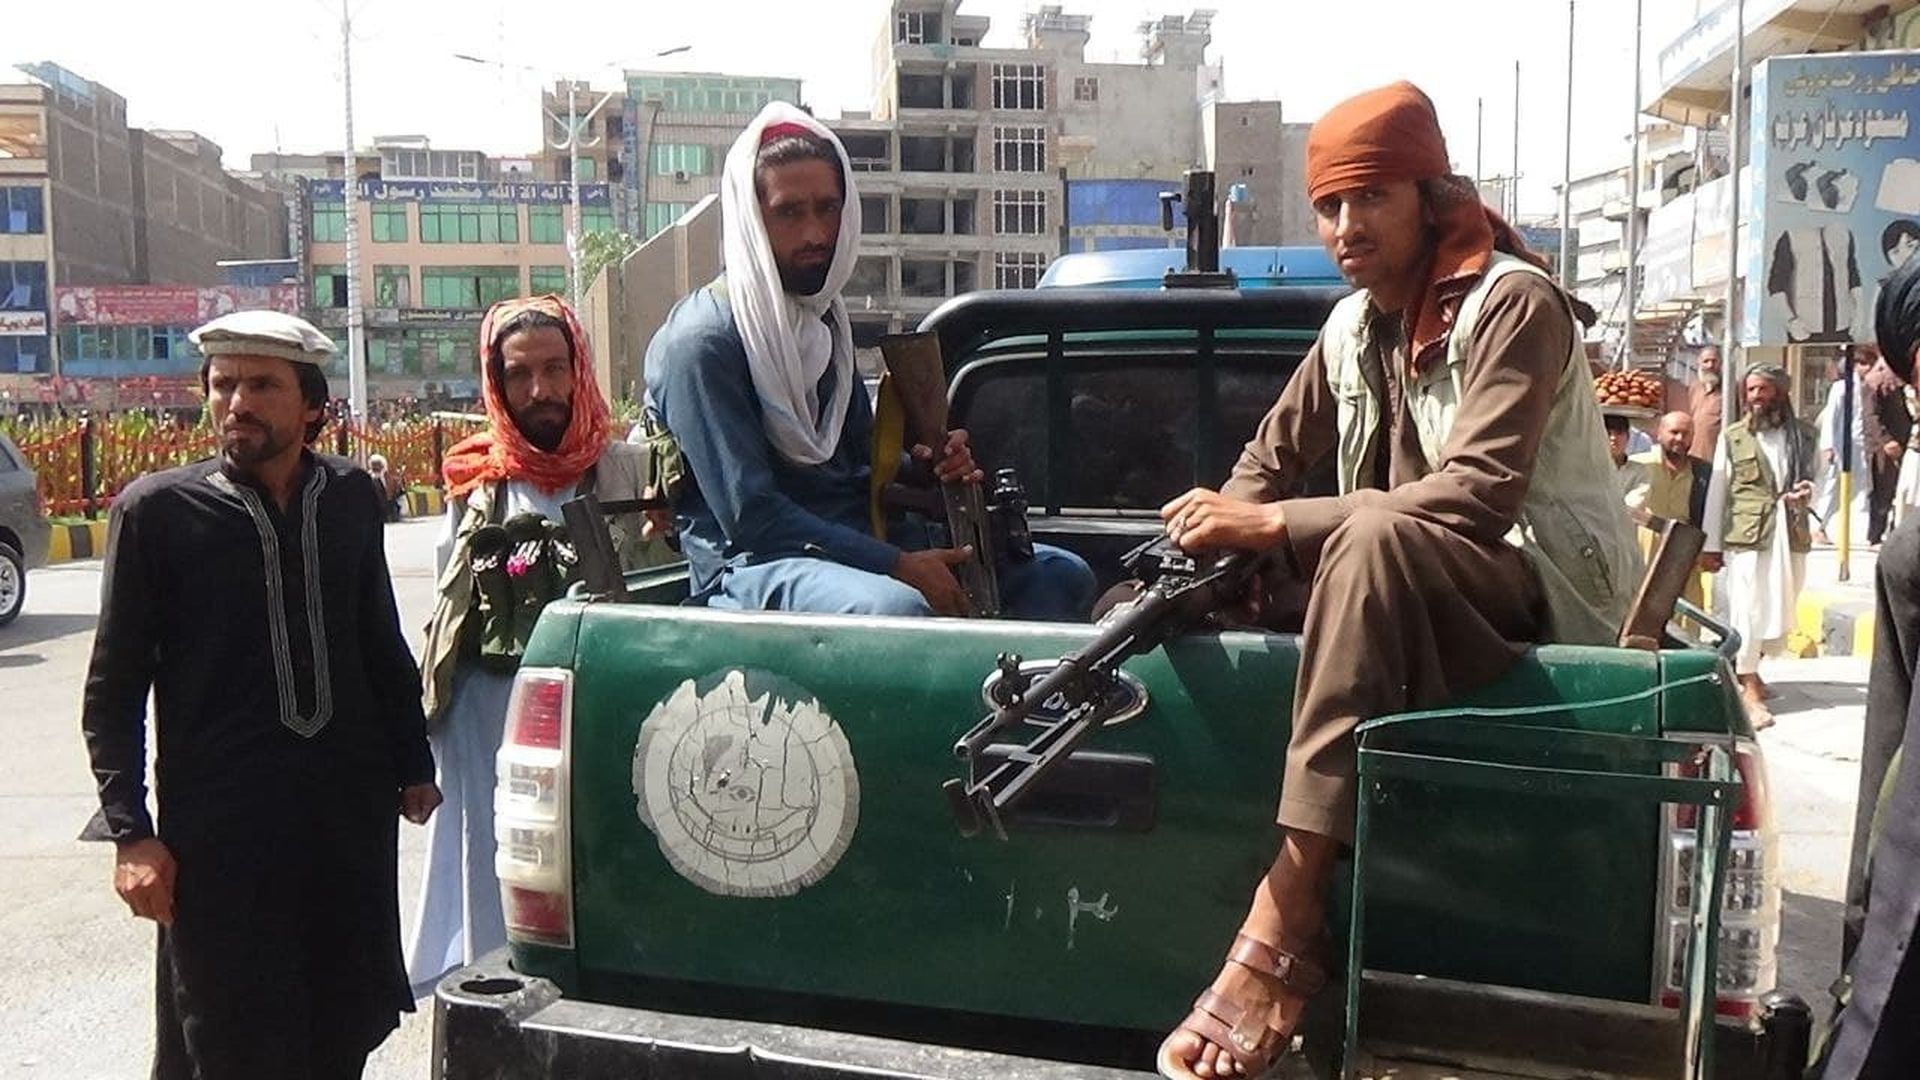 Taliban check points are seen in the streets of Jalalabad city, Afghanistan on August 18